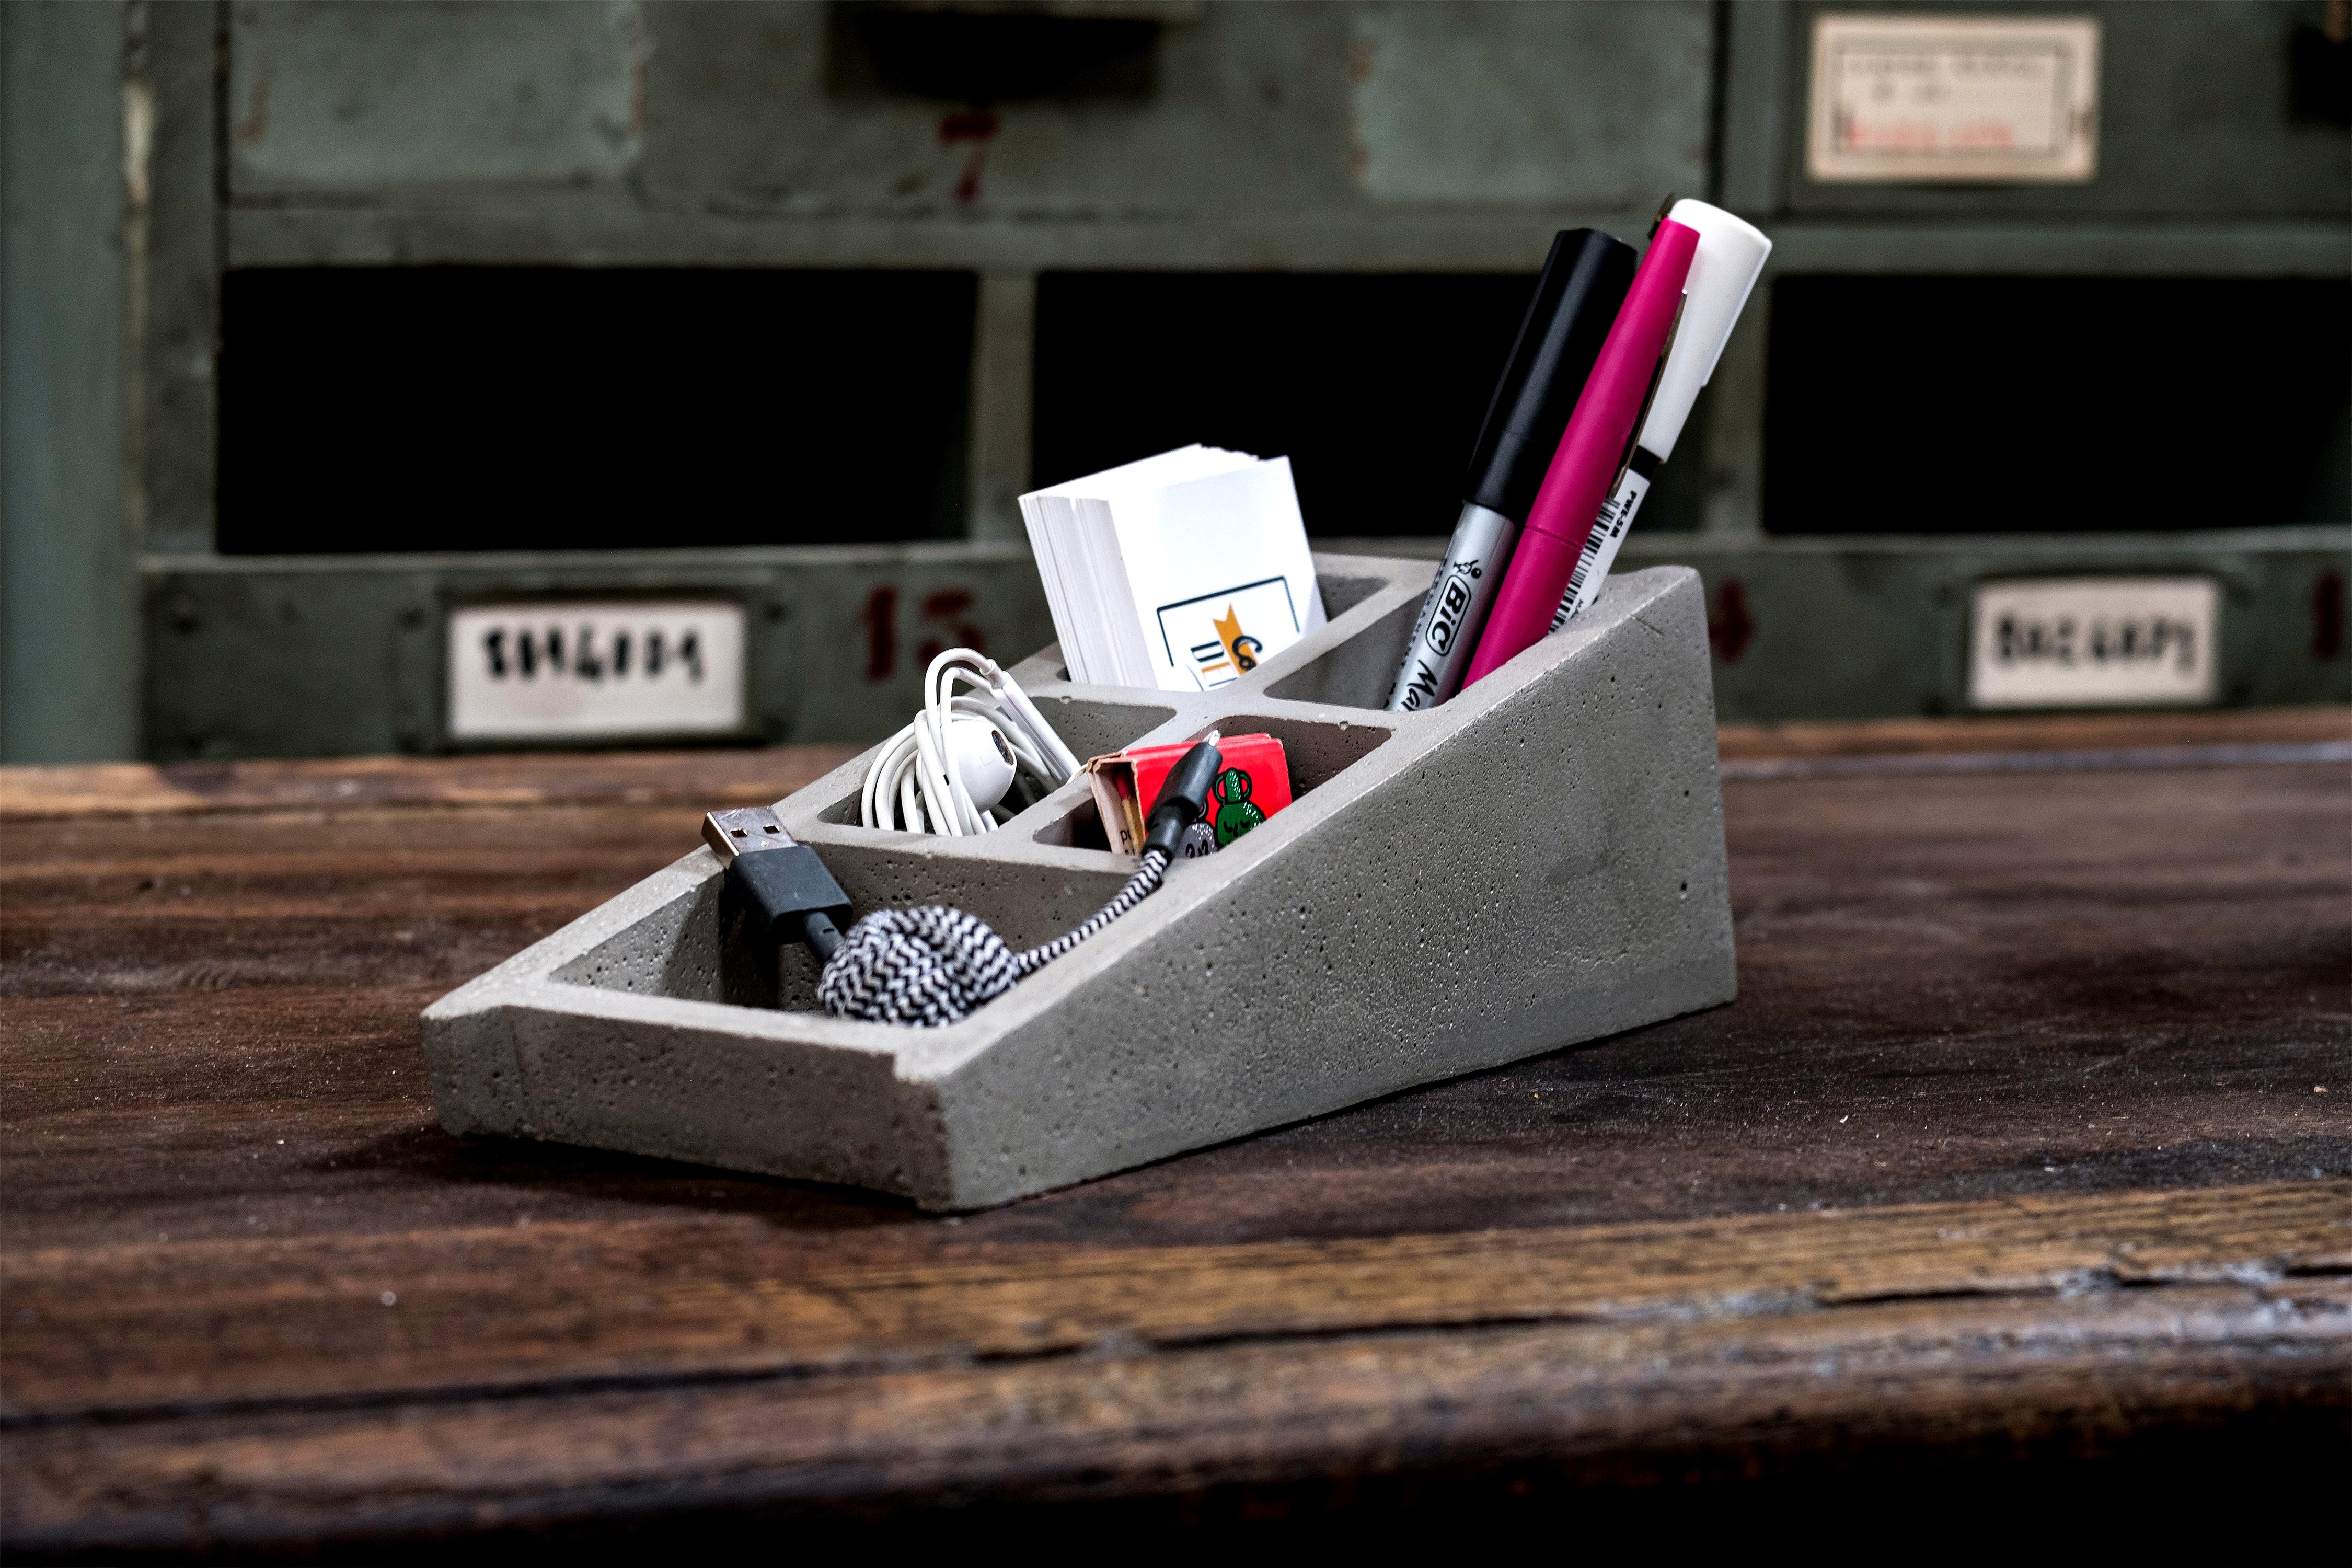 Directly inspired by the emblematic concrete block, this desk organizer offers 5 multi-function compartments.
It's up to you to fill them up as you need to. Time to get to work!.